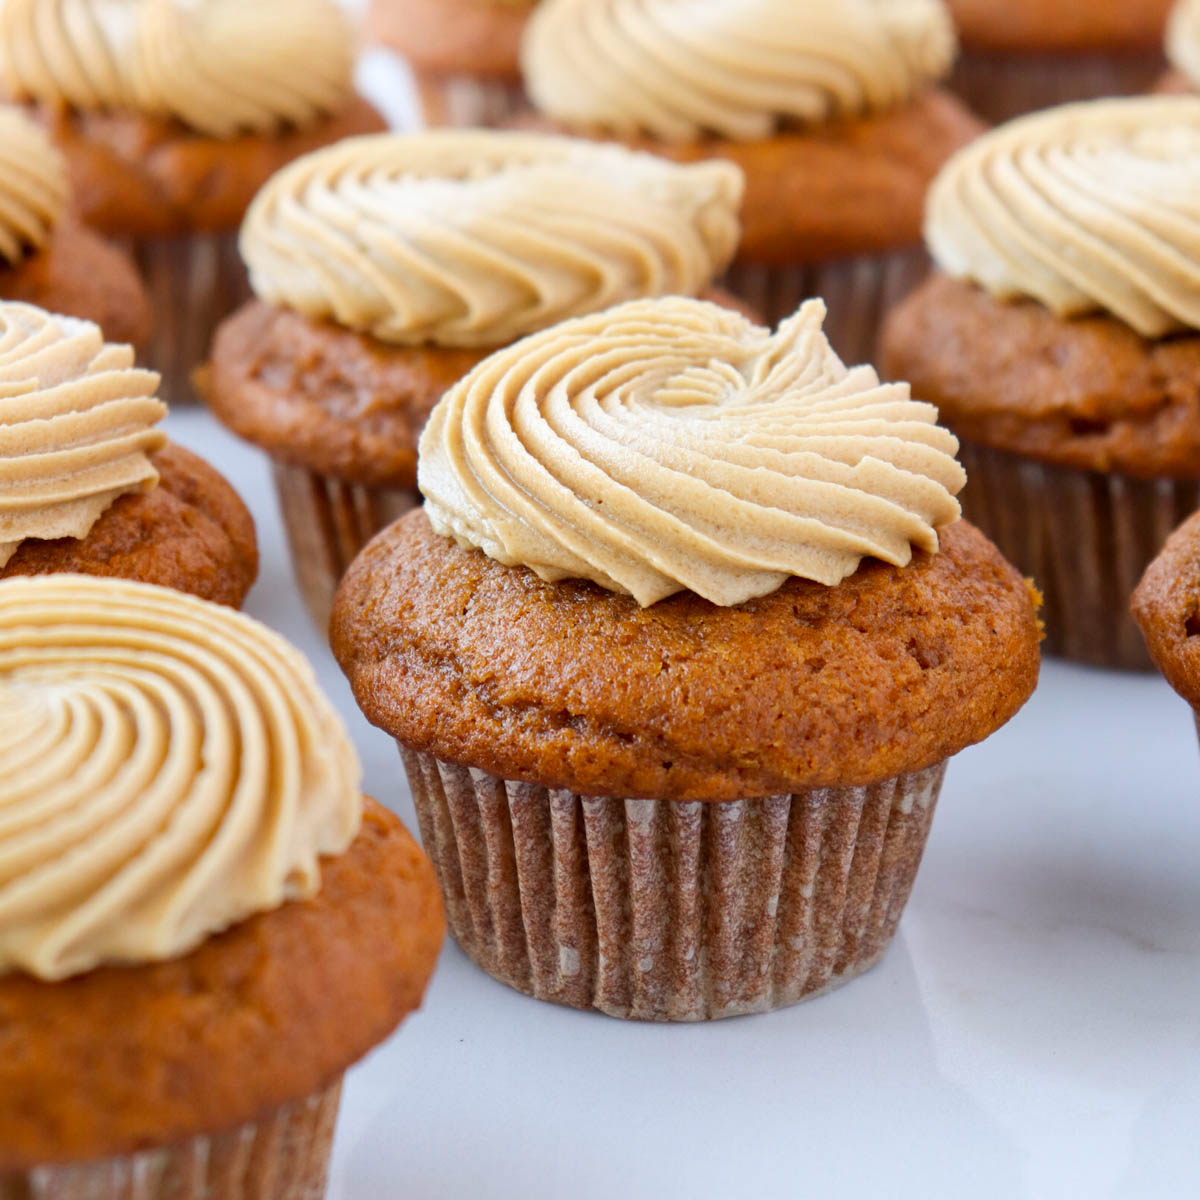 Pumpkin cupcakes topped with a swirl of frosting.